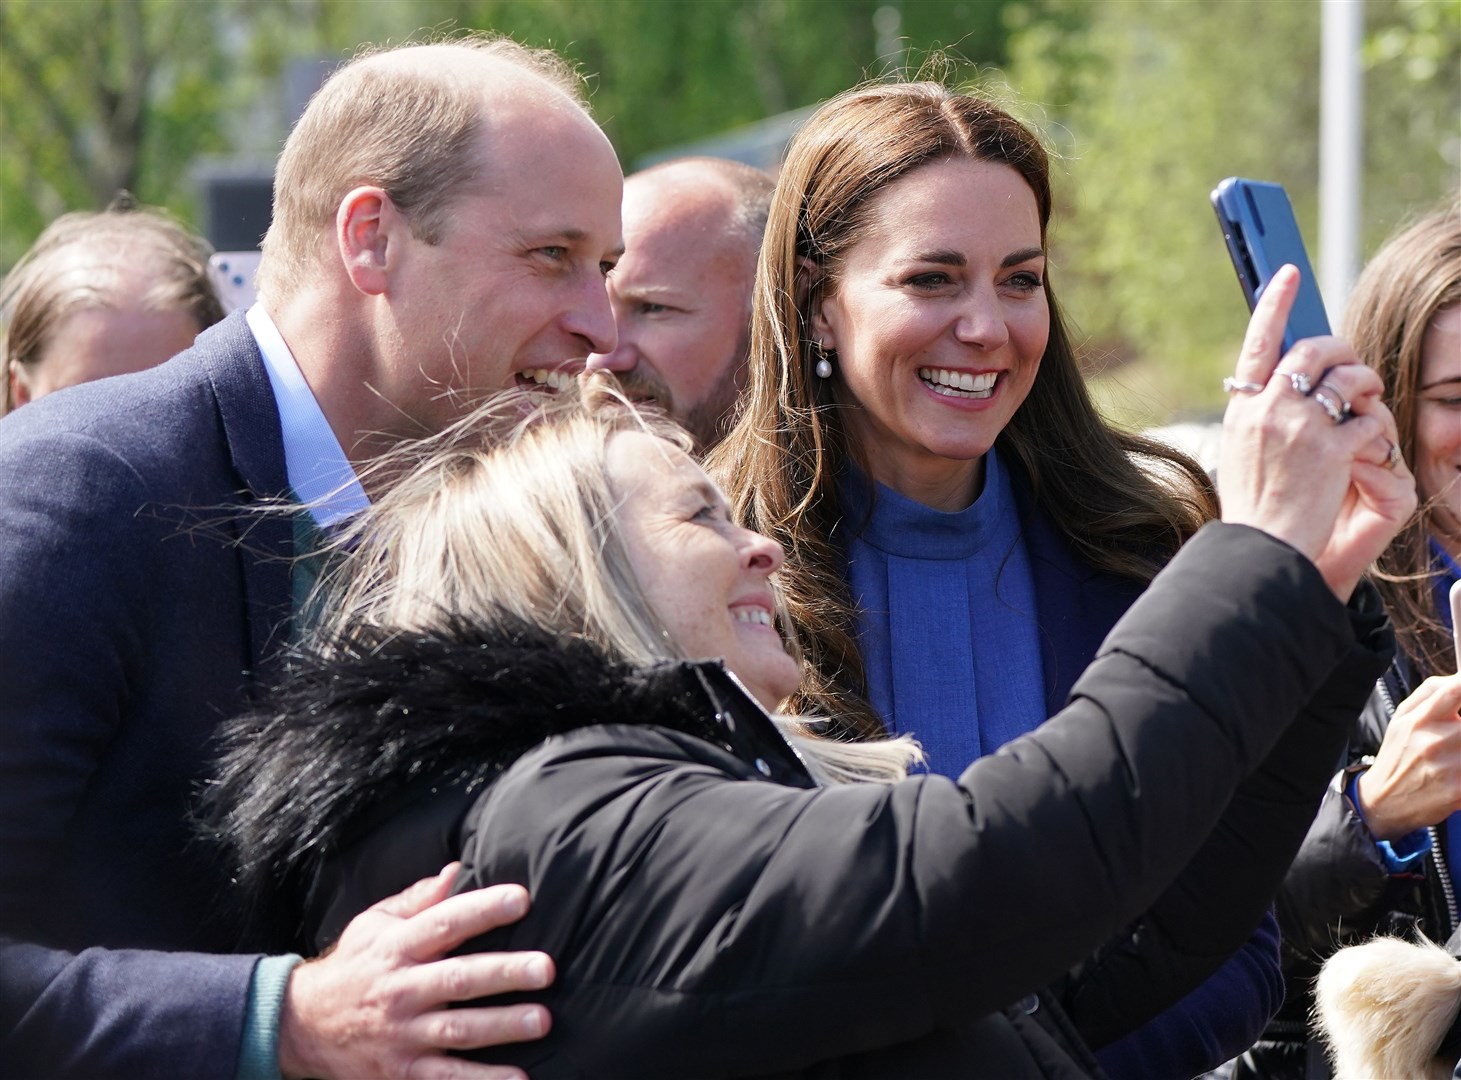 The Duke and Duchess of Cambridge were only too happy to pose for a selfie during a visit to the Wheatley Group in Glasgow in May (Andrew Milligan/PA)